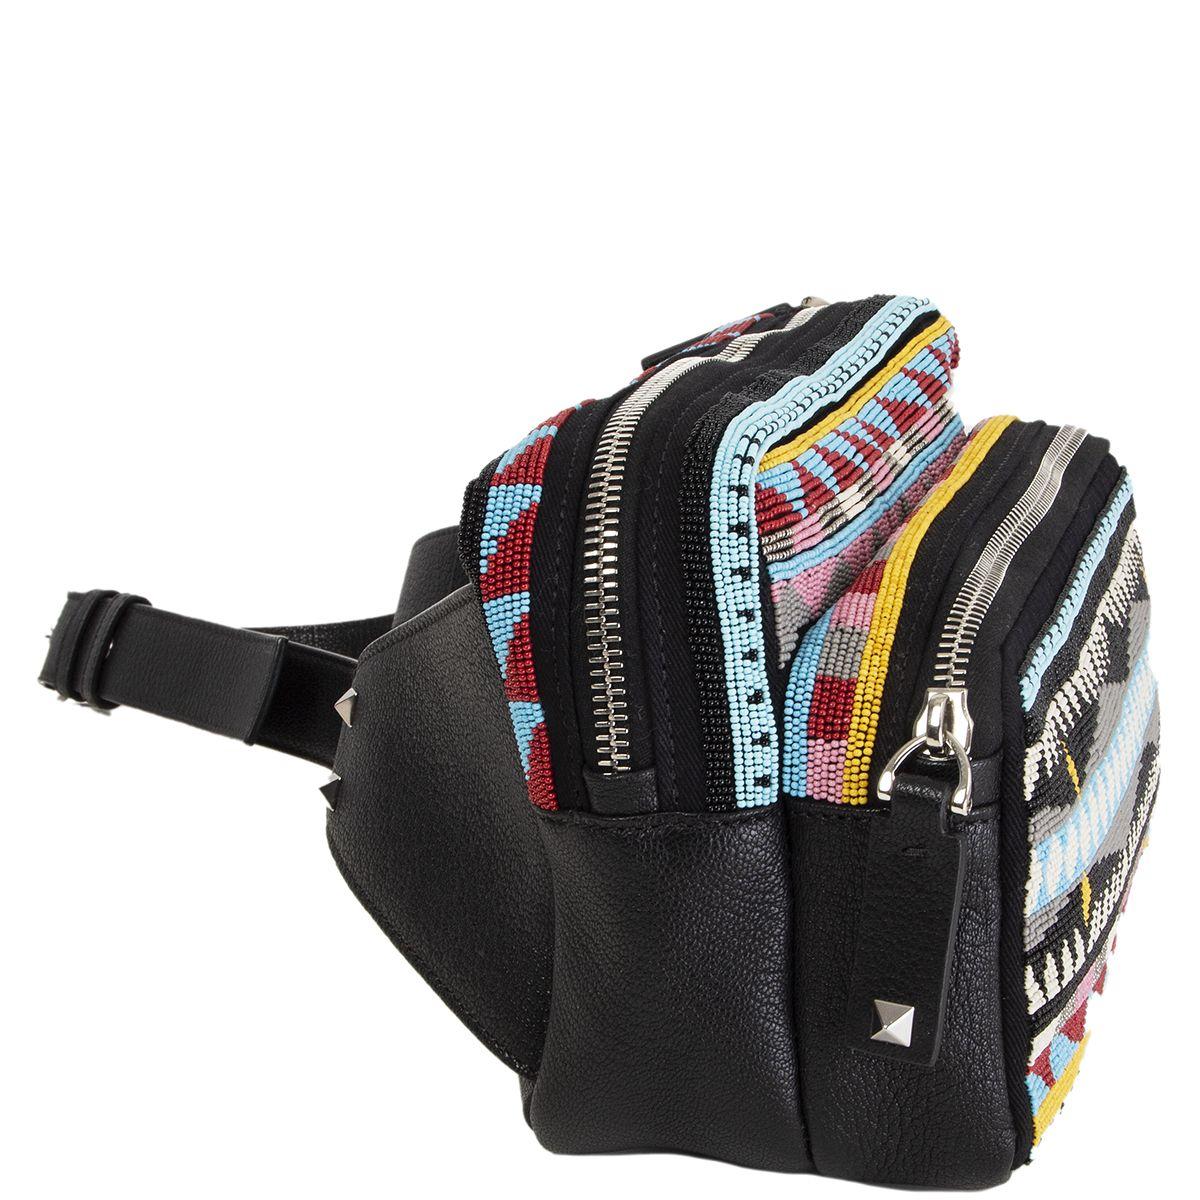 Valentino fanny pack embellished with multicolor beads on black canvas and leather featuring front zipper pocket. Opens with a zipper on top and is lined in black canvas. Belt strap is size L. Has been carried once and is in virtually new condition.